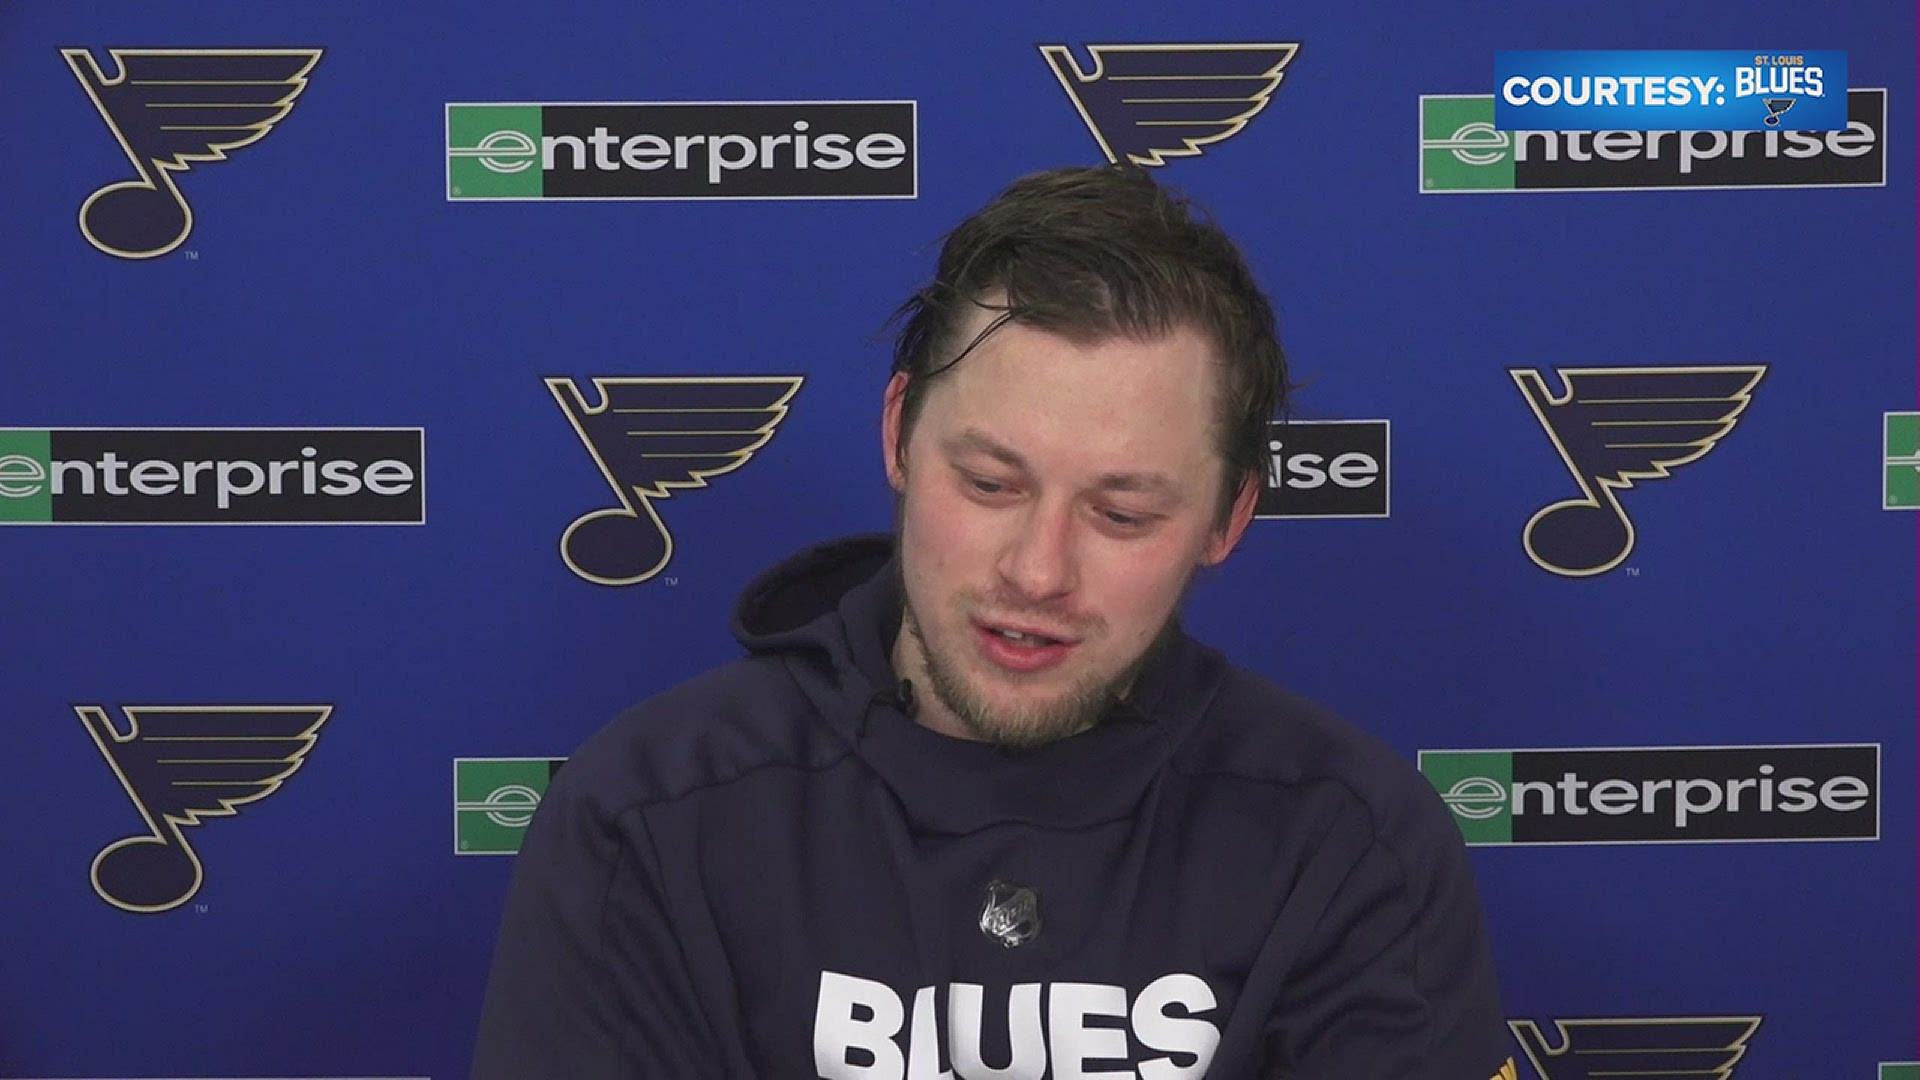 Tarasenko is healthy, and ready to help the Blues repeat. Video courtesy Blue Note Productions.